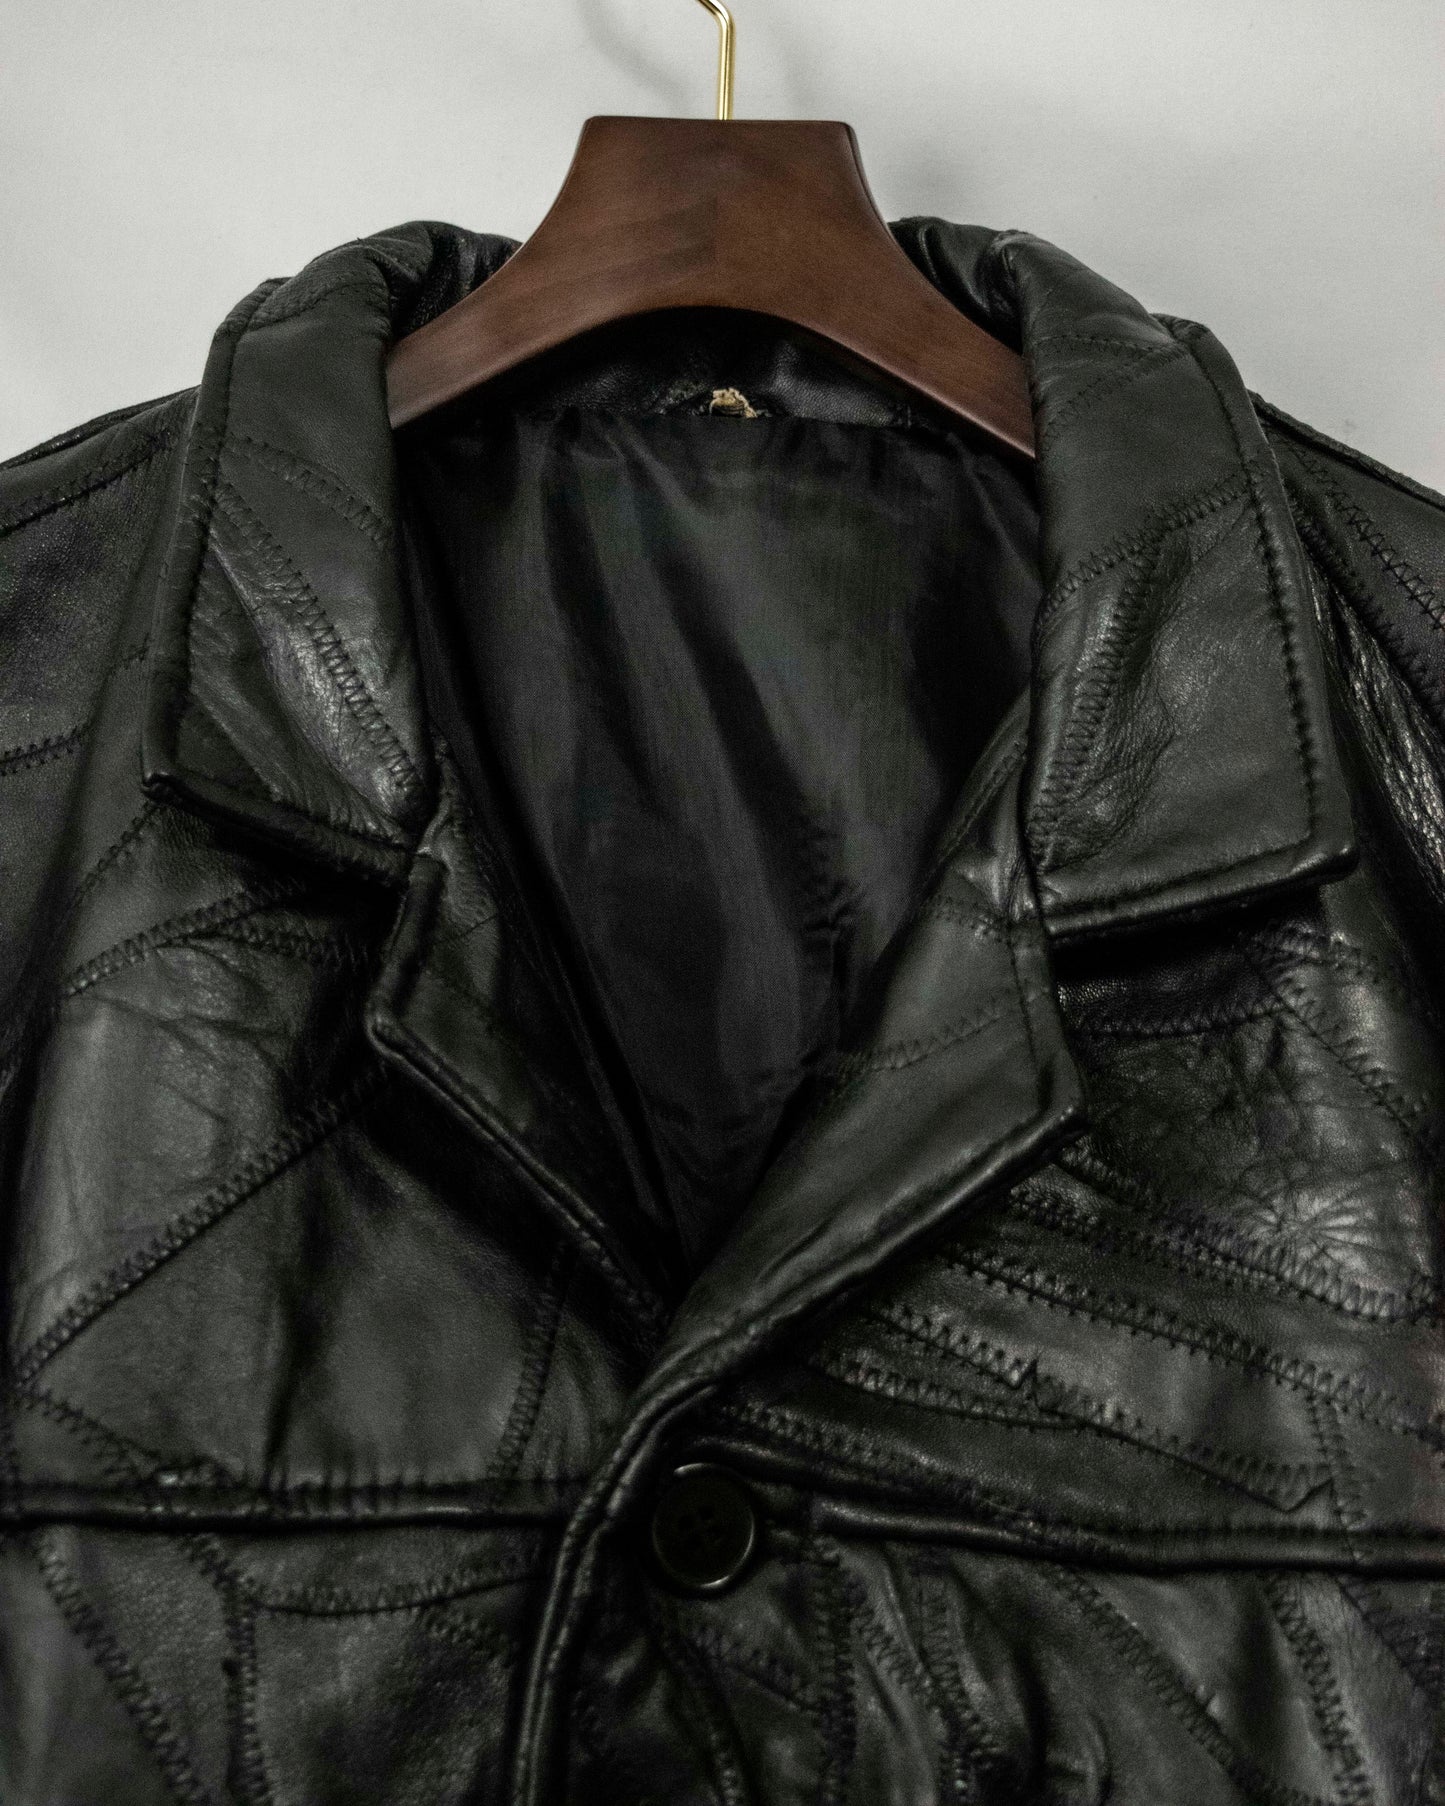 "Vera pelle" Vintage Leather Patchwork Coverall Jacket